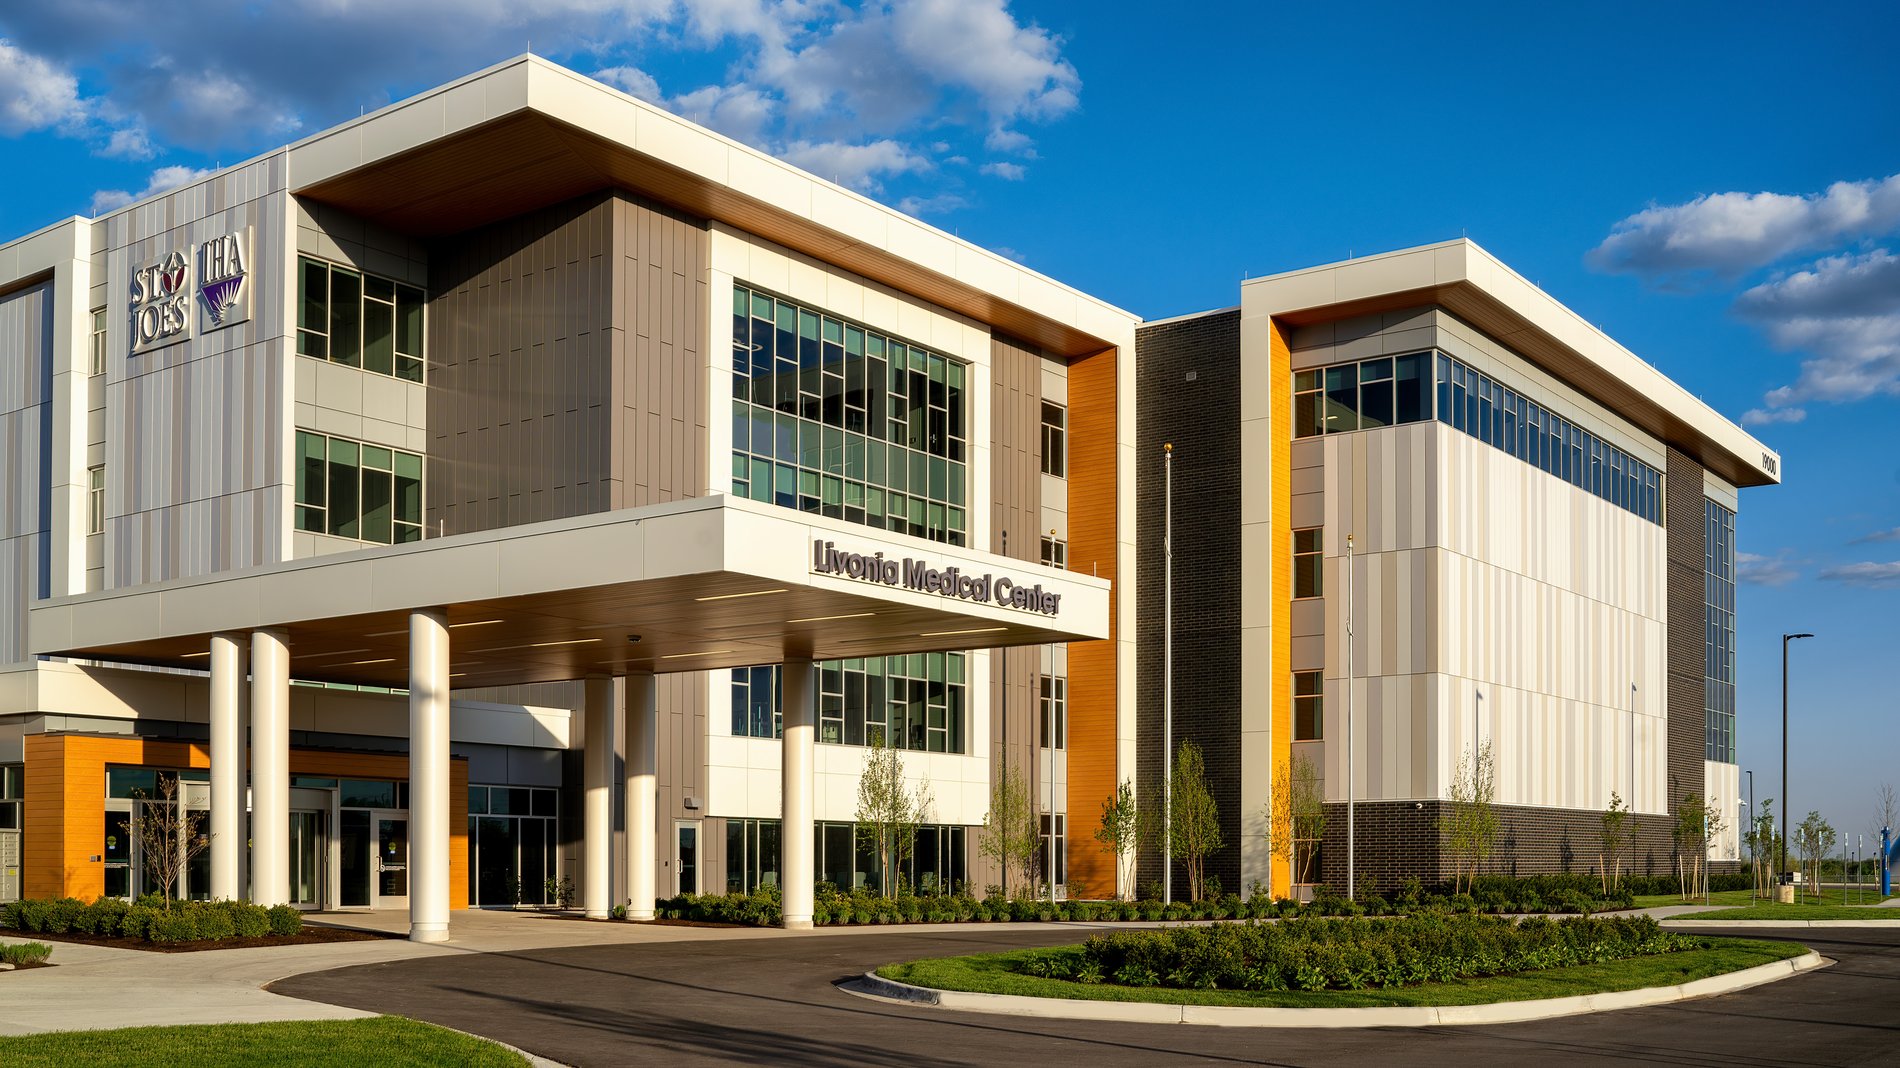 IHA Imaging Livonia is located in the Livonia Medical Center on the campus of Schoolcraft College.